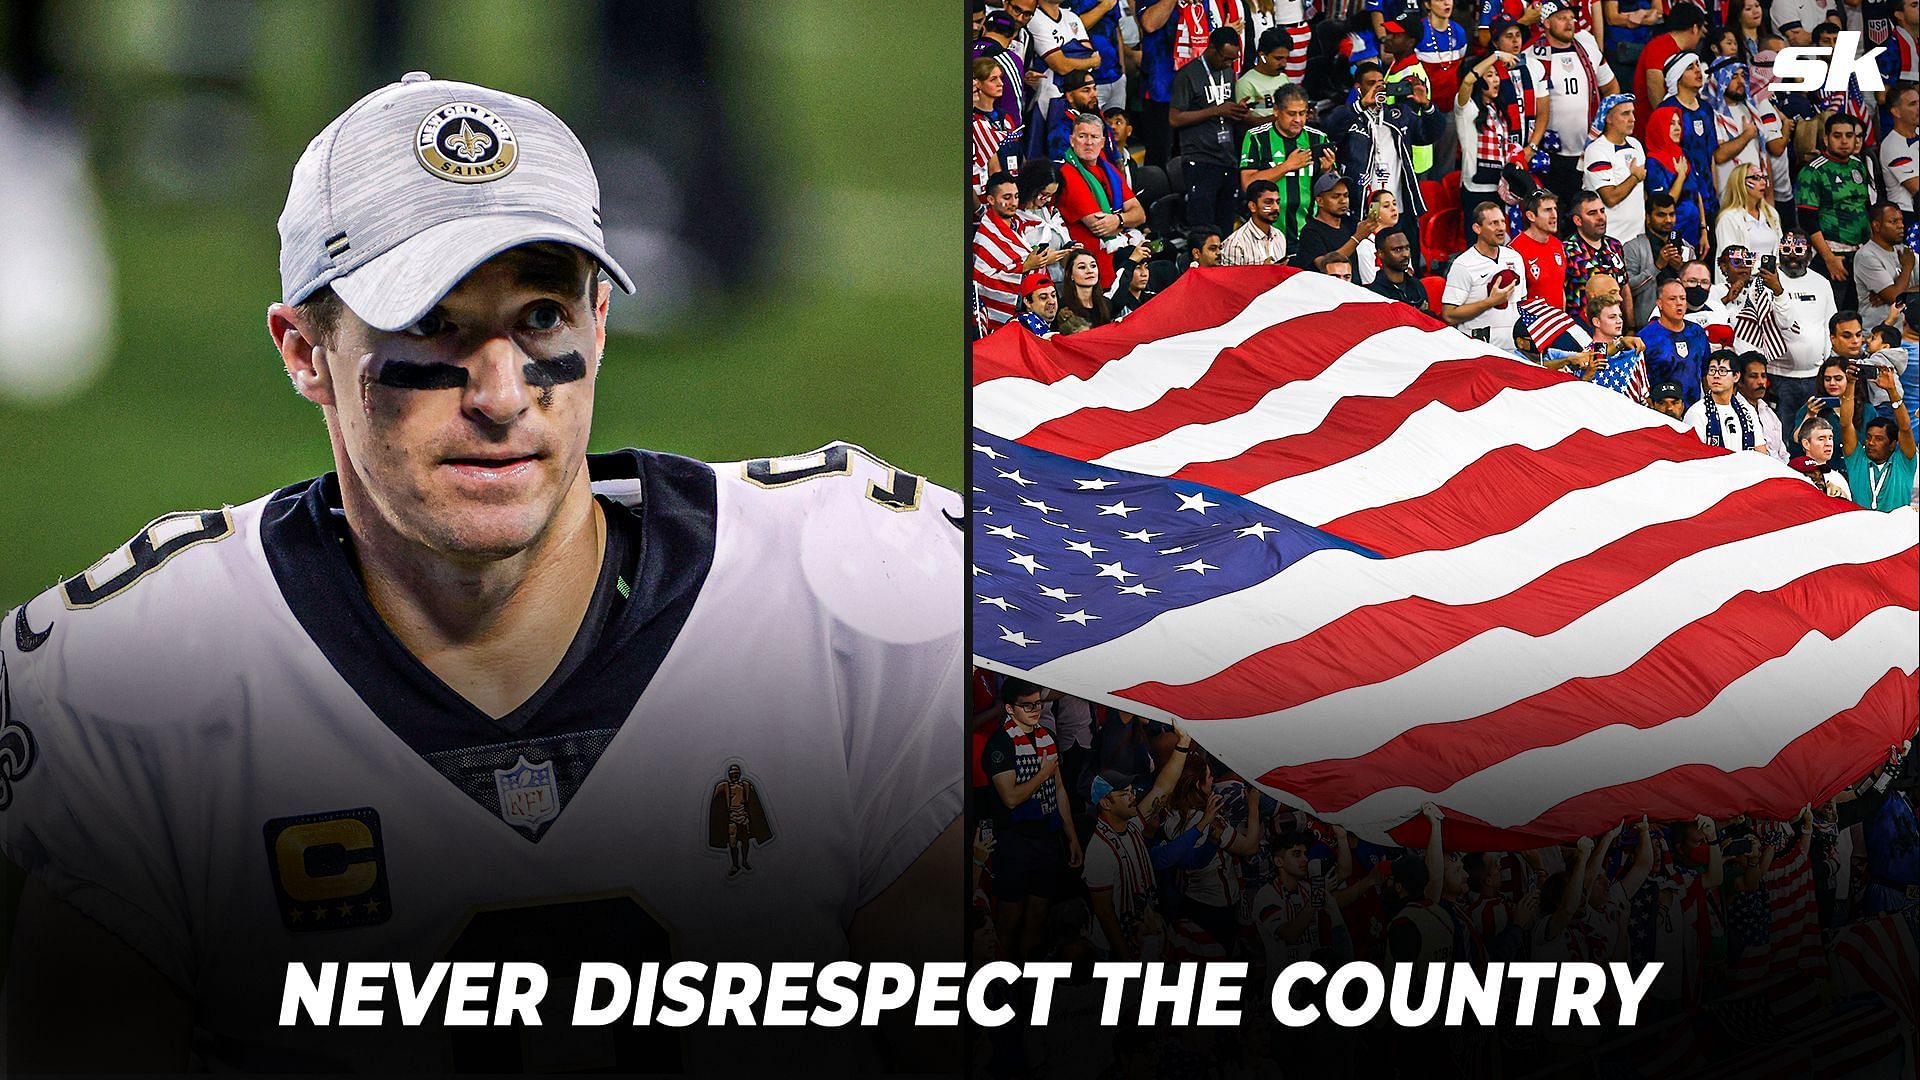 When Drew Brees courted controversy after bizarre statement about allegiance